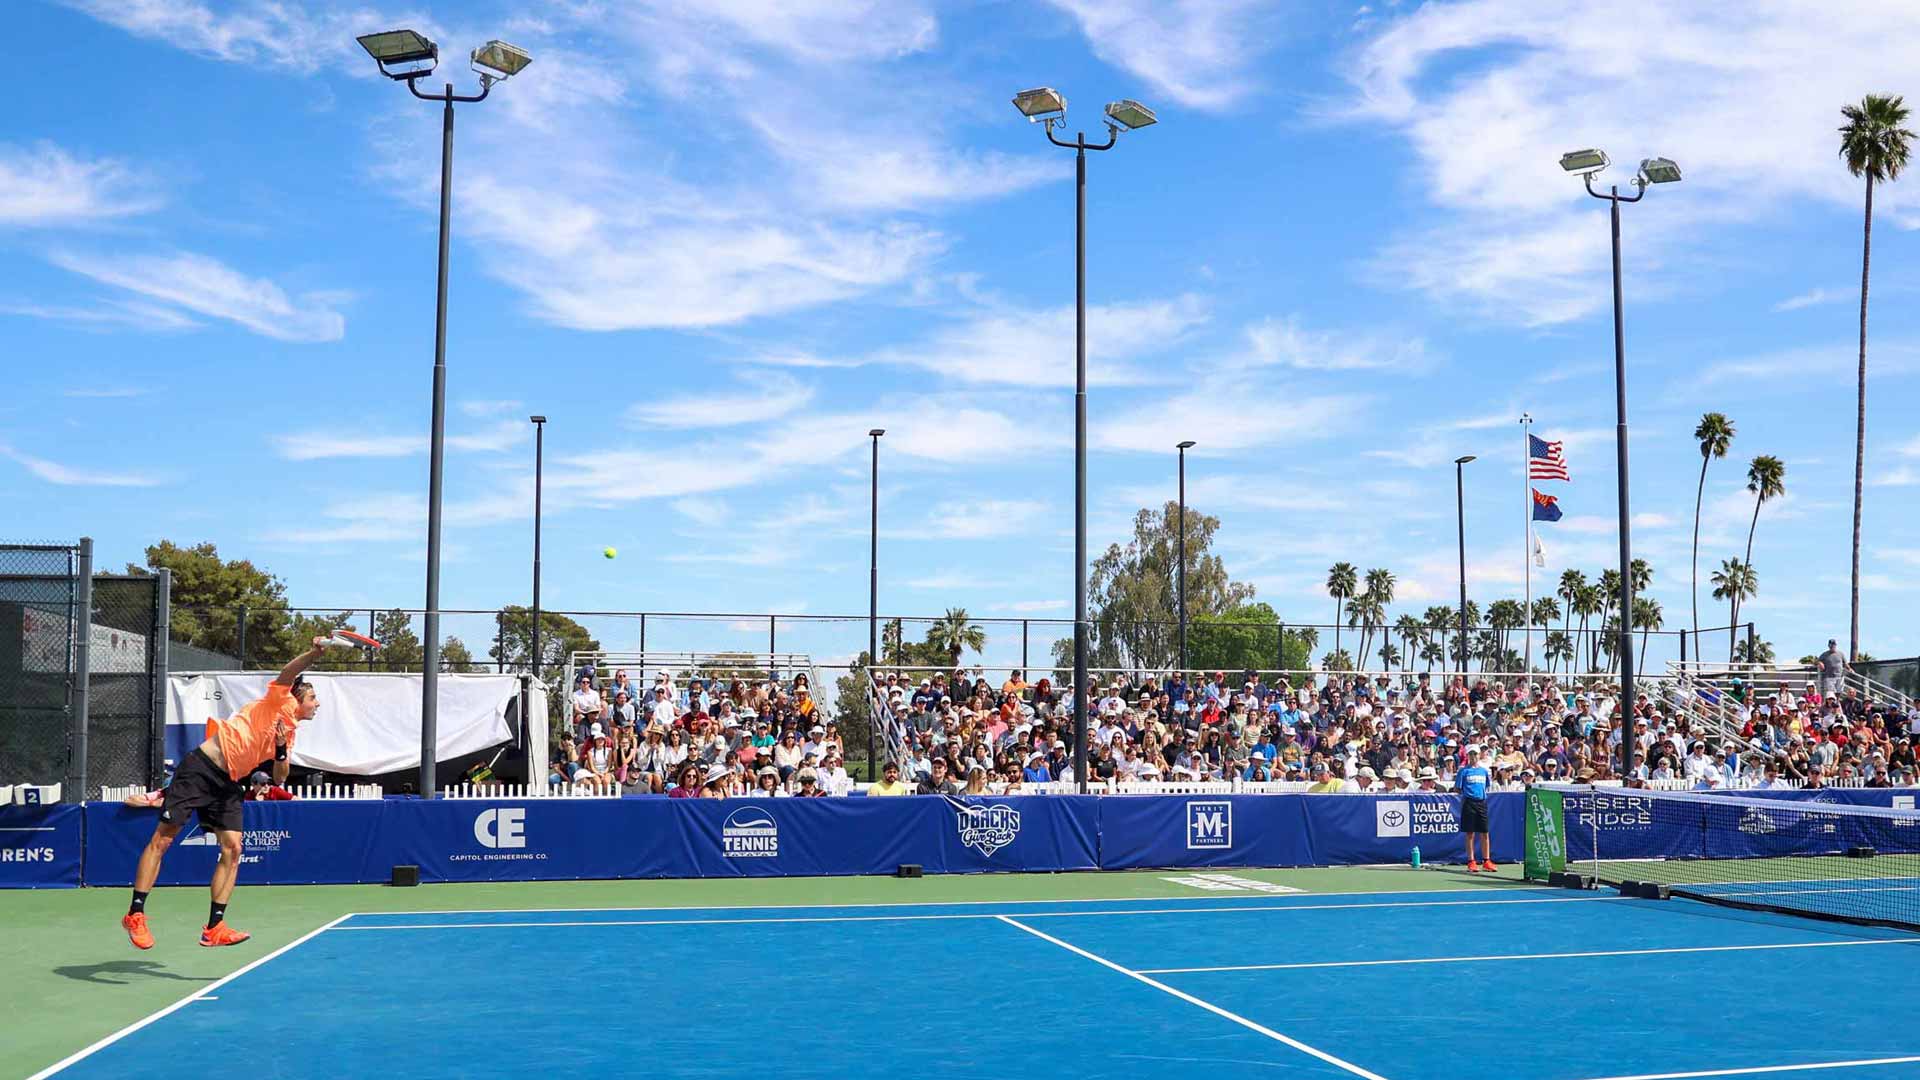 A jam-packed crowd enjoys Saturday's action at the Challenger 175 event in Phoenix.